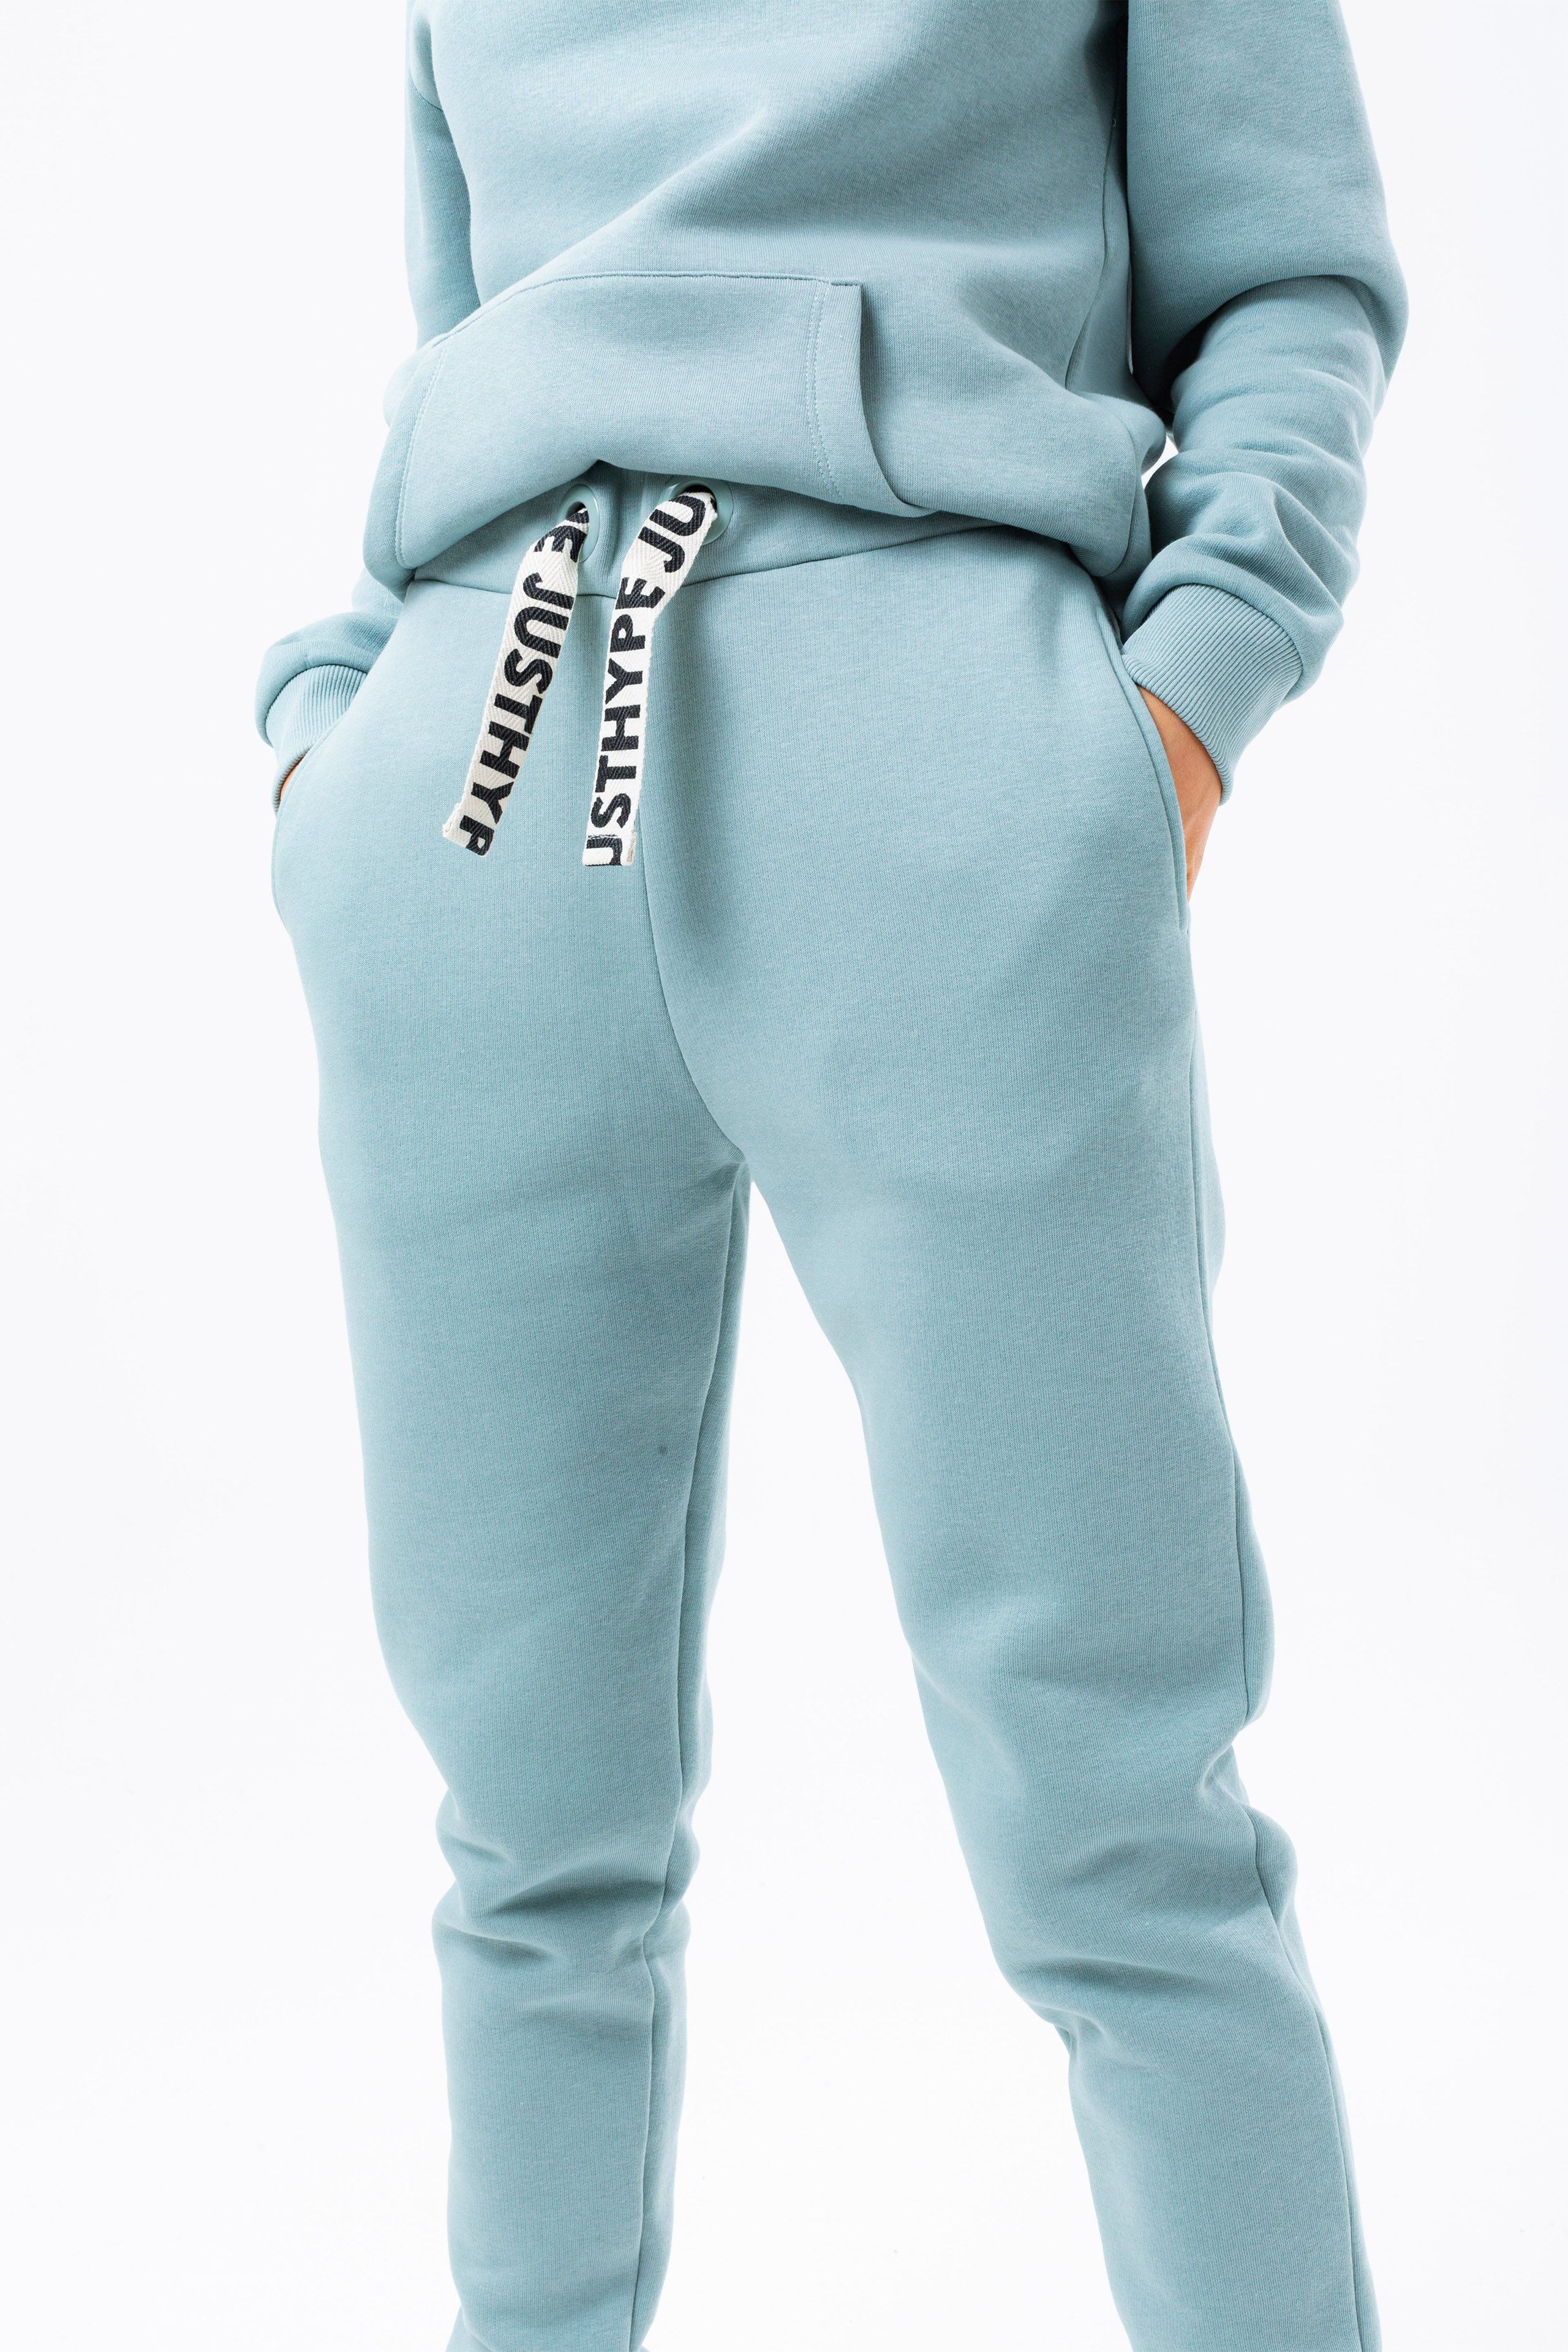 The HYPE. sage drawstring women's joggers are perfectly matched with the HYPE. sage drawstring women's hoodie to complete the look. Or opt for a cute contrasting white crop tee. Designed in 65% cotton and 35% polyester for an unreal amount of comfort. With an elasticated waistband and woven embossed drawstrings, these essential women's joggers are the perfect addition to your jogger 'drobe. Available in UK sizes from 4 to 20. Machine wash at 30 degrees.